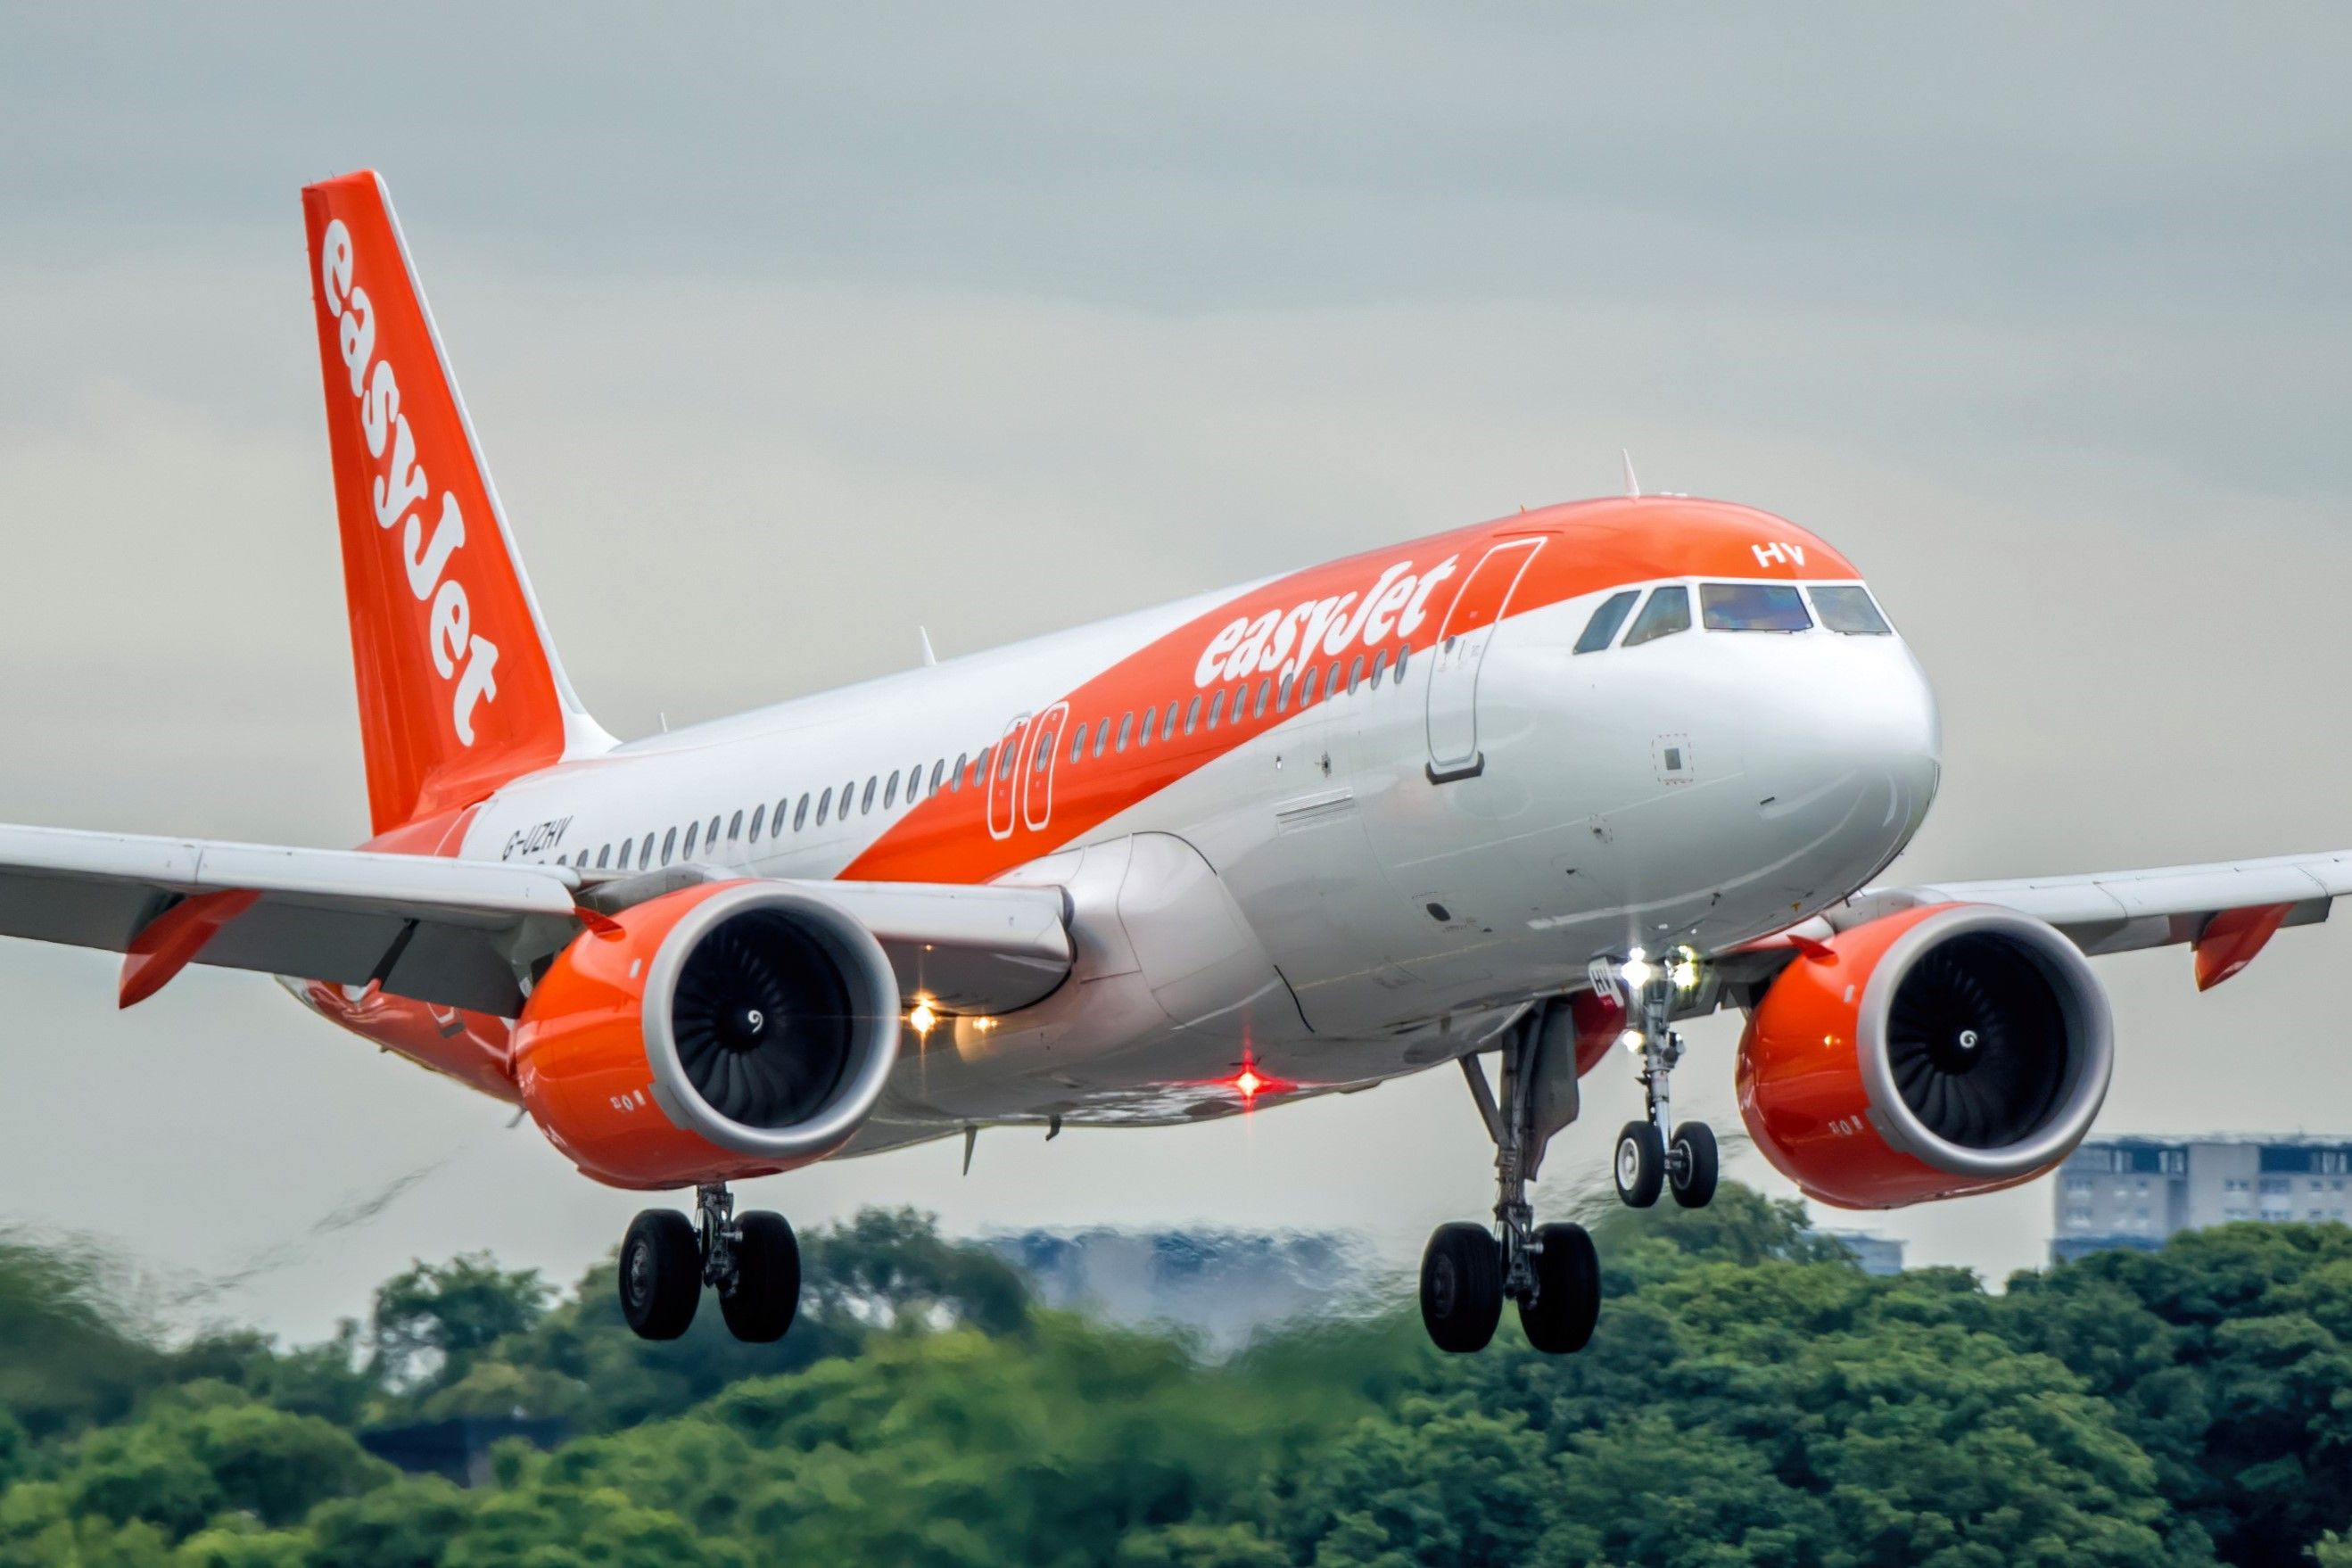 AneasyJet Airbus A320neo about to land.